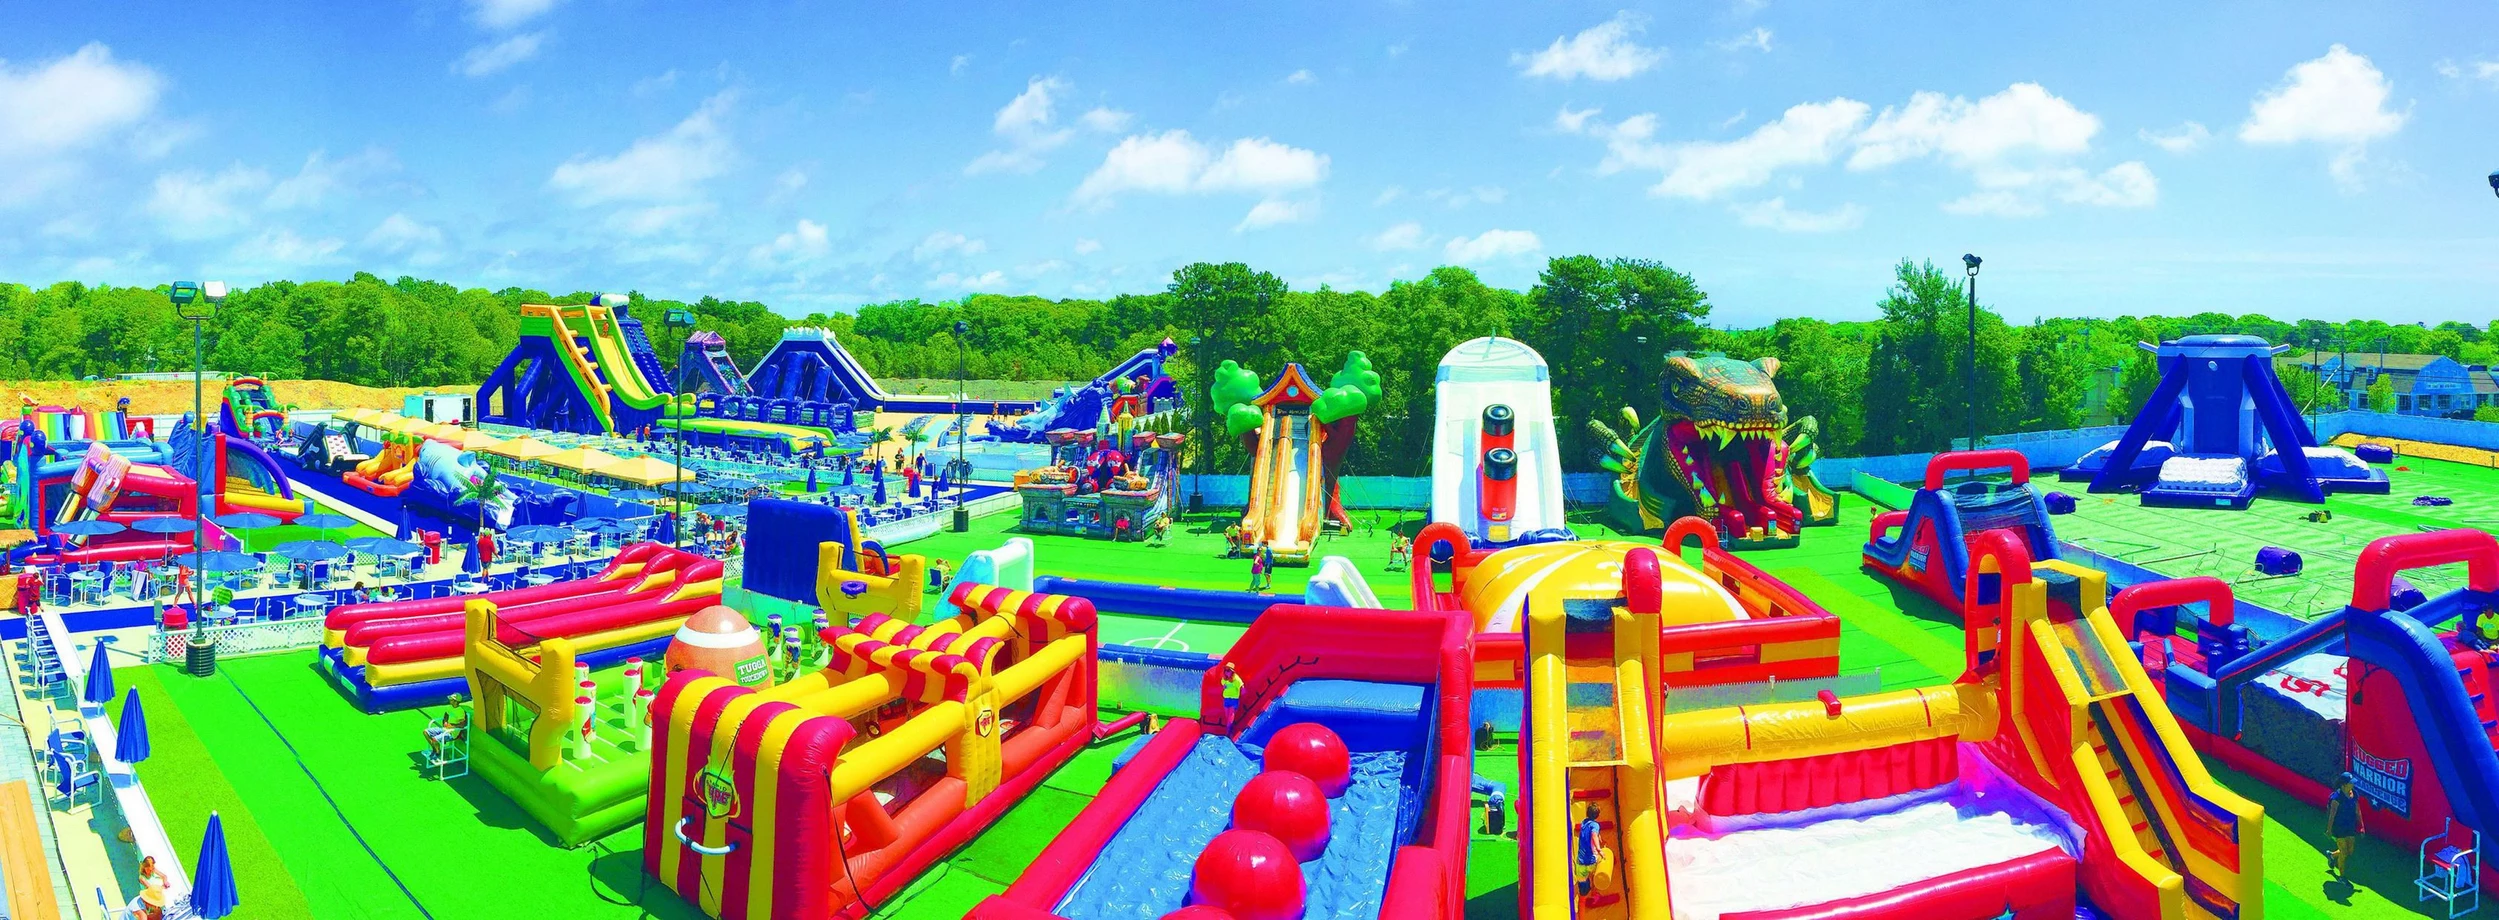 America's Largest Cape Cod Inflatables and Wicked Waves Park